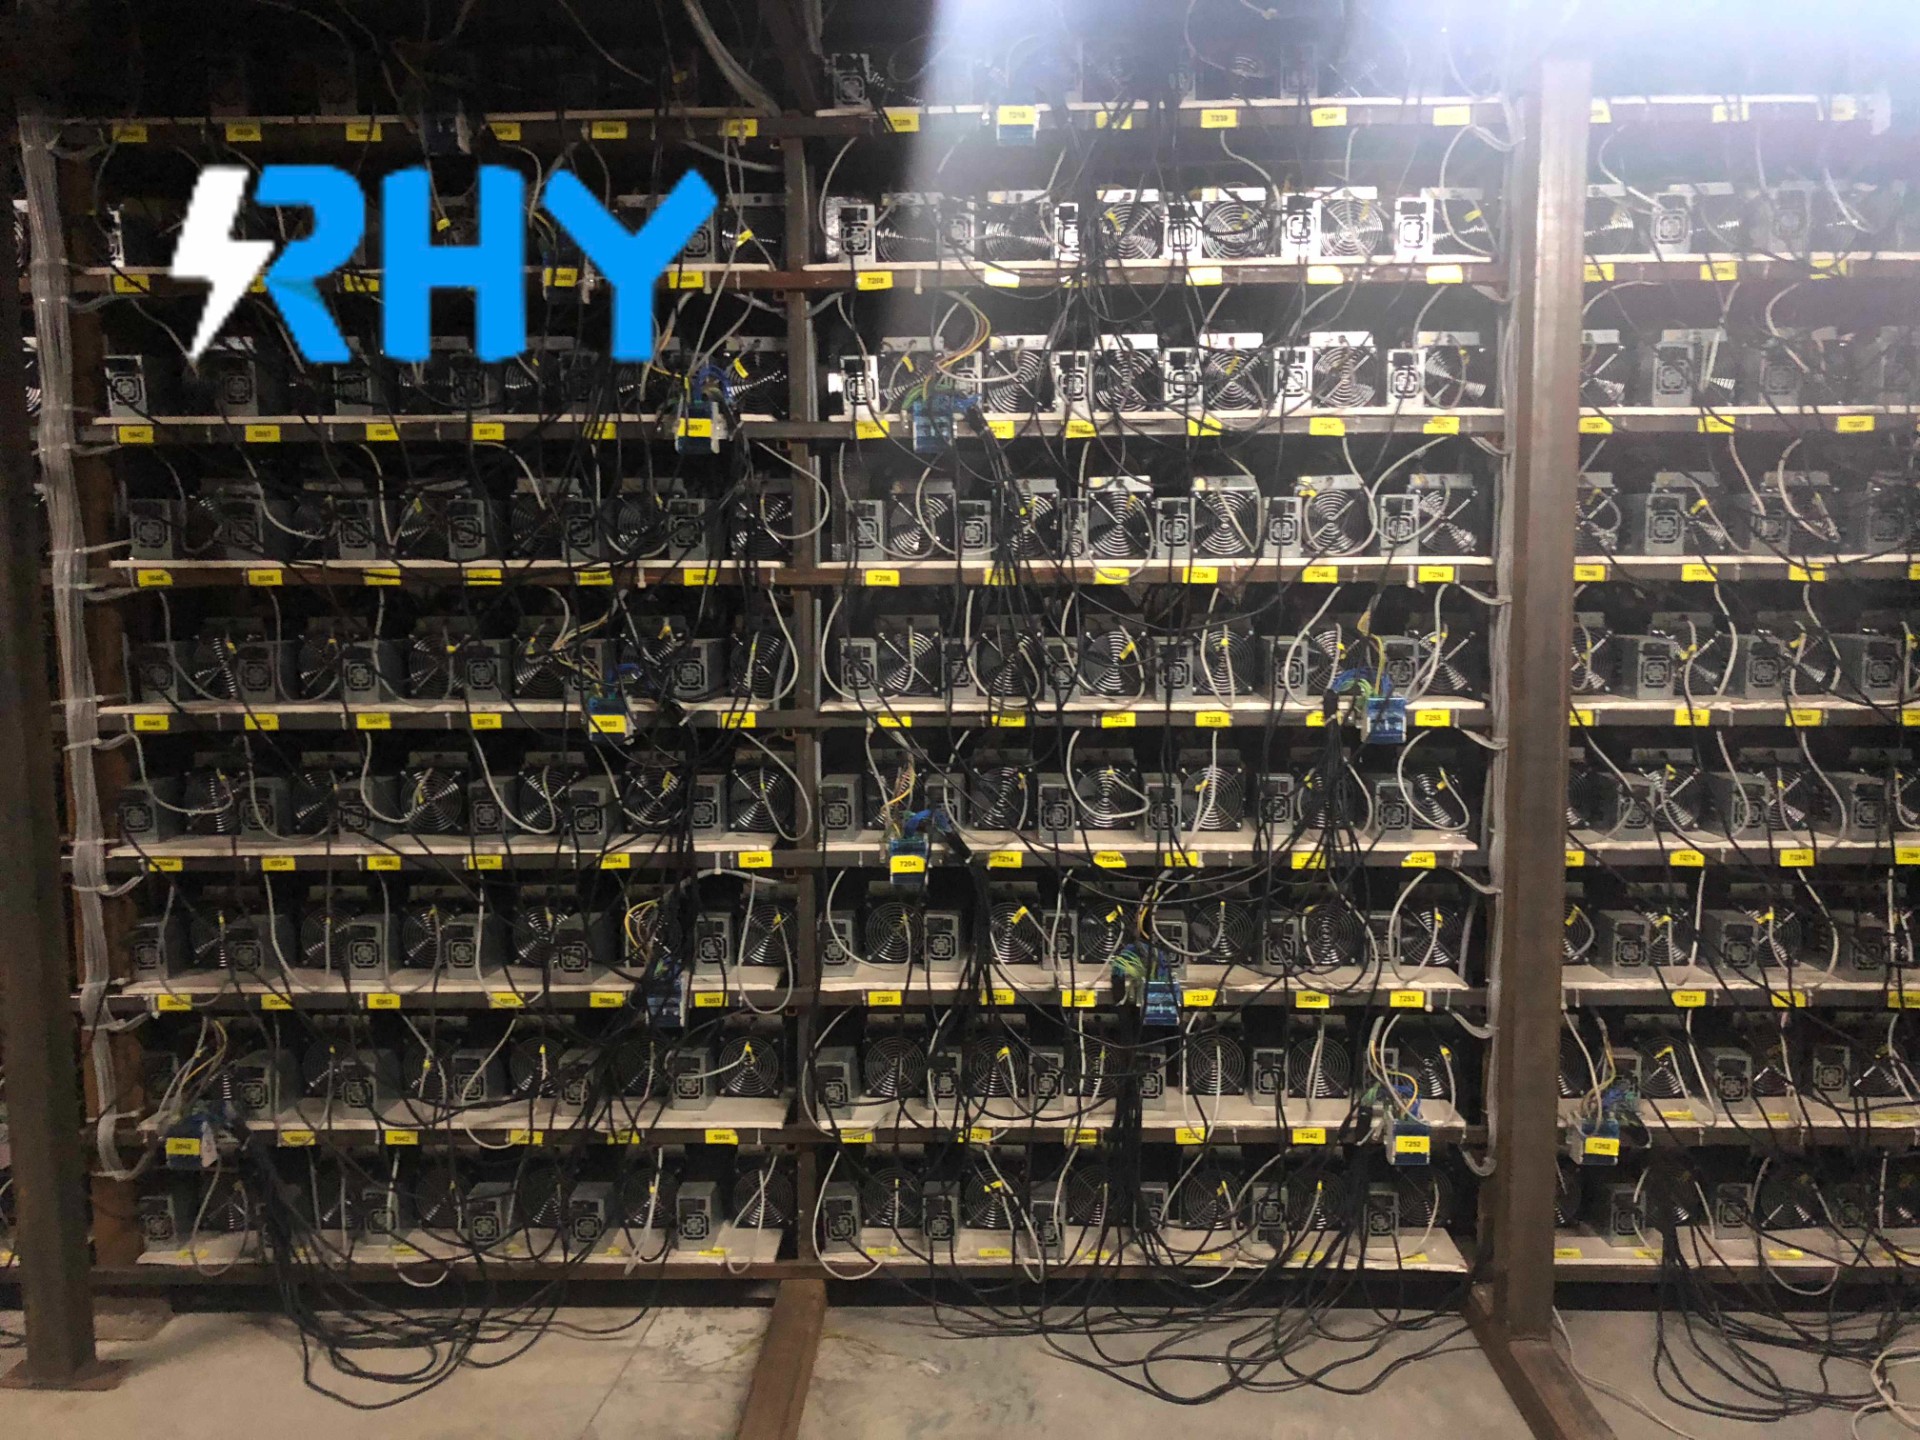  Co-op mining makes it easy to turn yourself into a mining farm owner